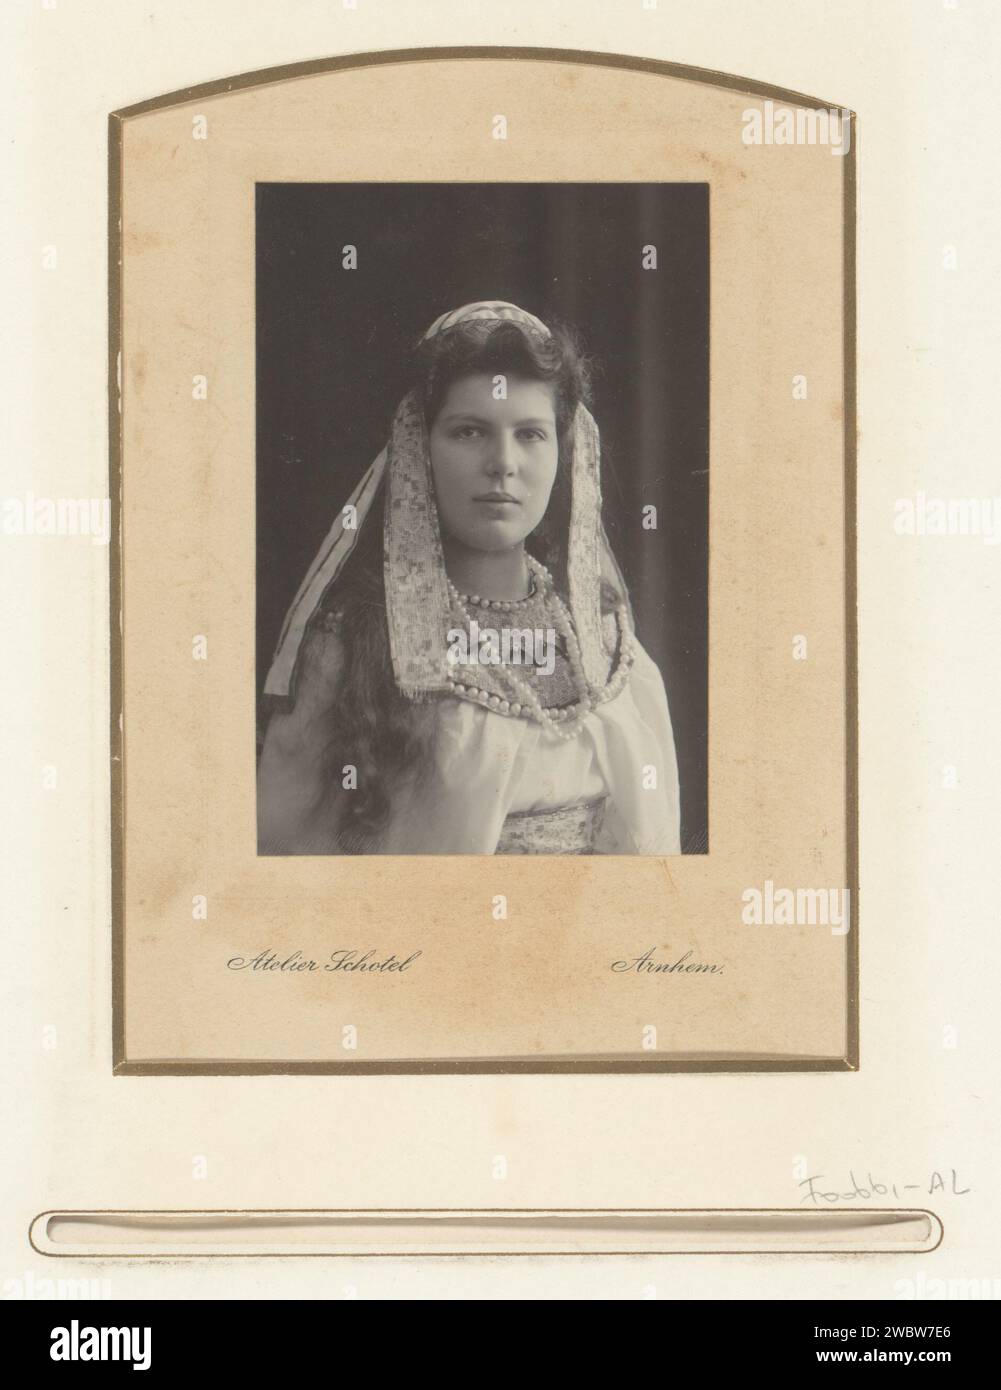 Portrait woman in Eastern costume with beads and embroidered ribbons, Stephanus Adrianus Schotel, 1902 - 1920 photograph. cabinet photograph This photo is part of an album. Arnhem cardboard. photographic support  historical persons - BB - woman. historical costume Stock Photo